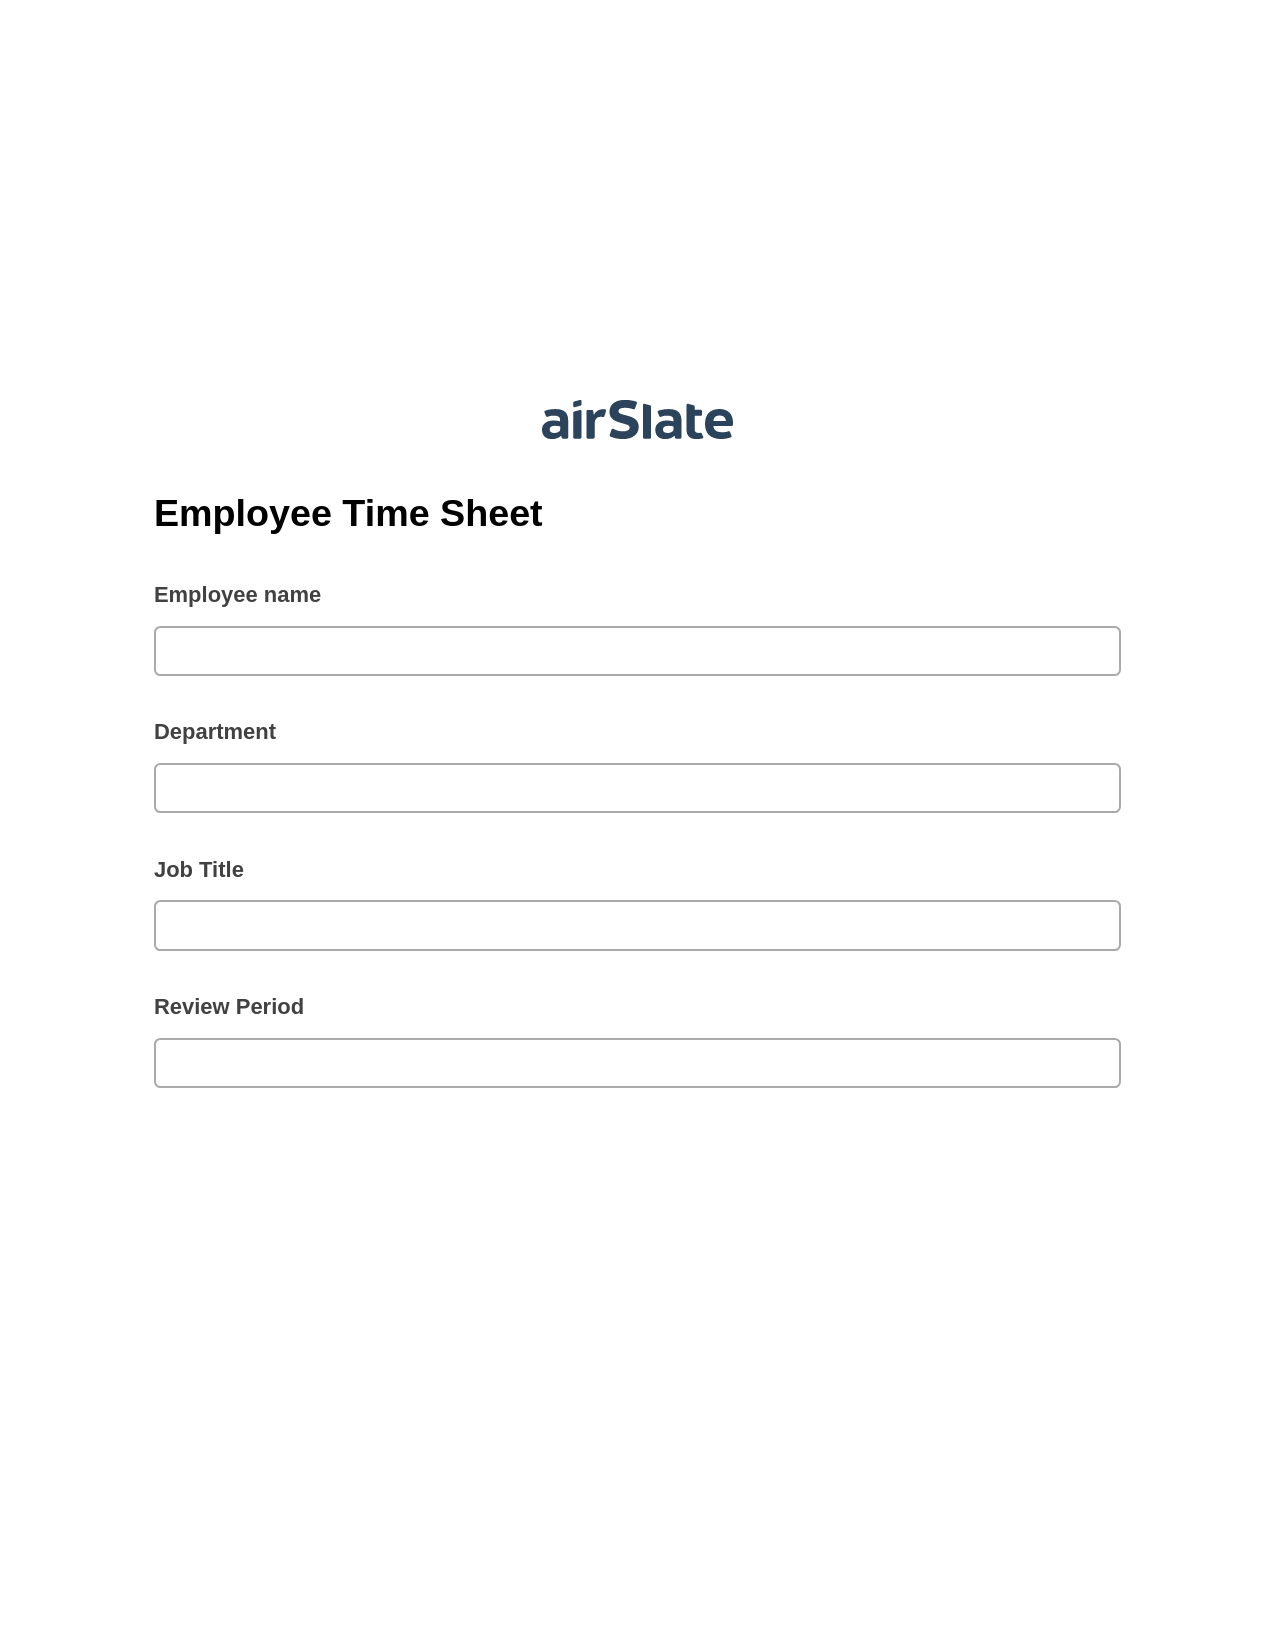 Employee Time Sheet Pre-fill Dropdowns from Google Sheet Bot, Create slate addon, Archive to Box Bot